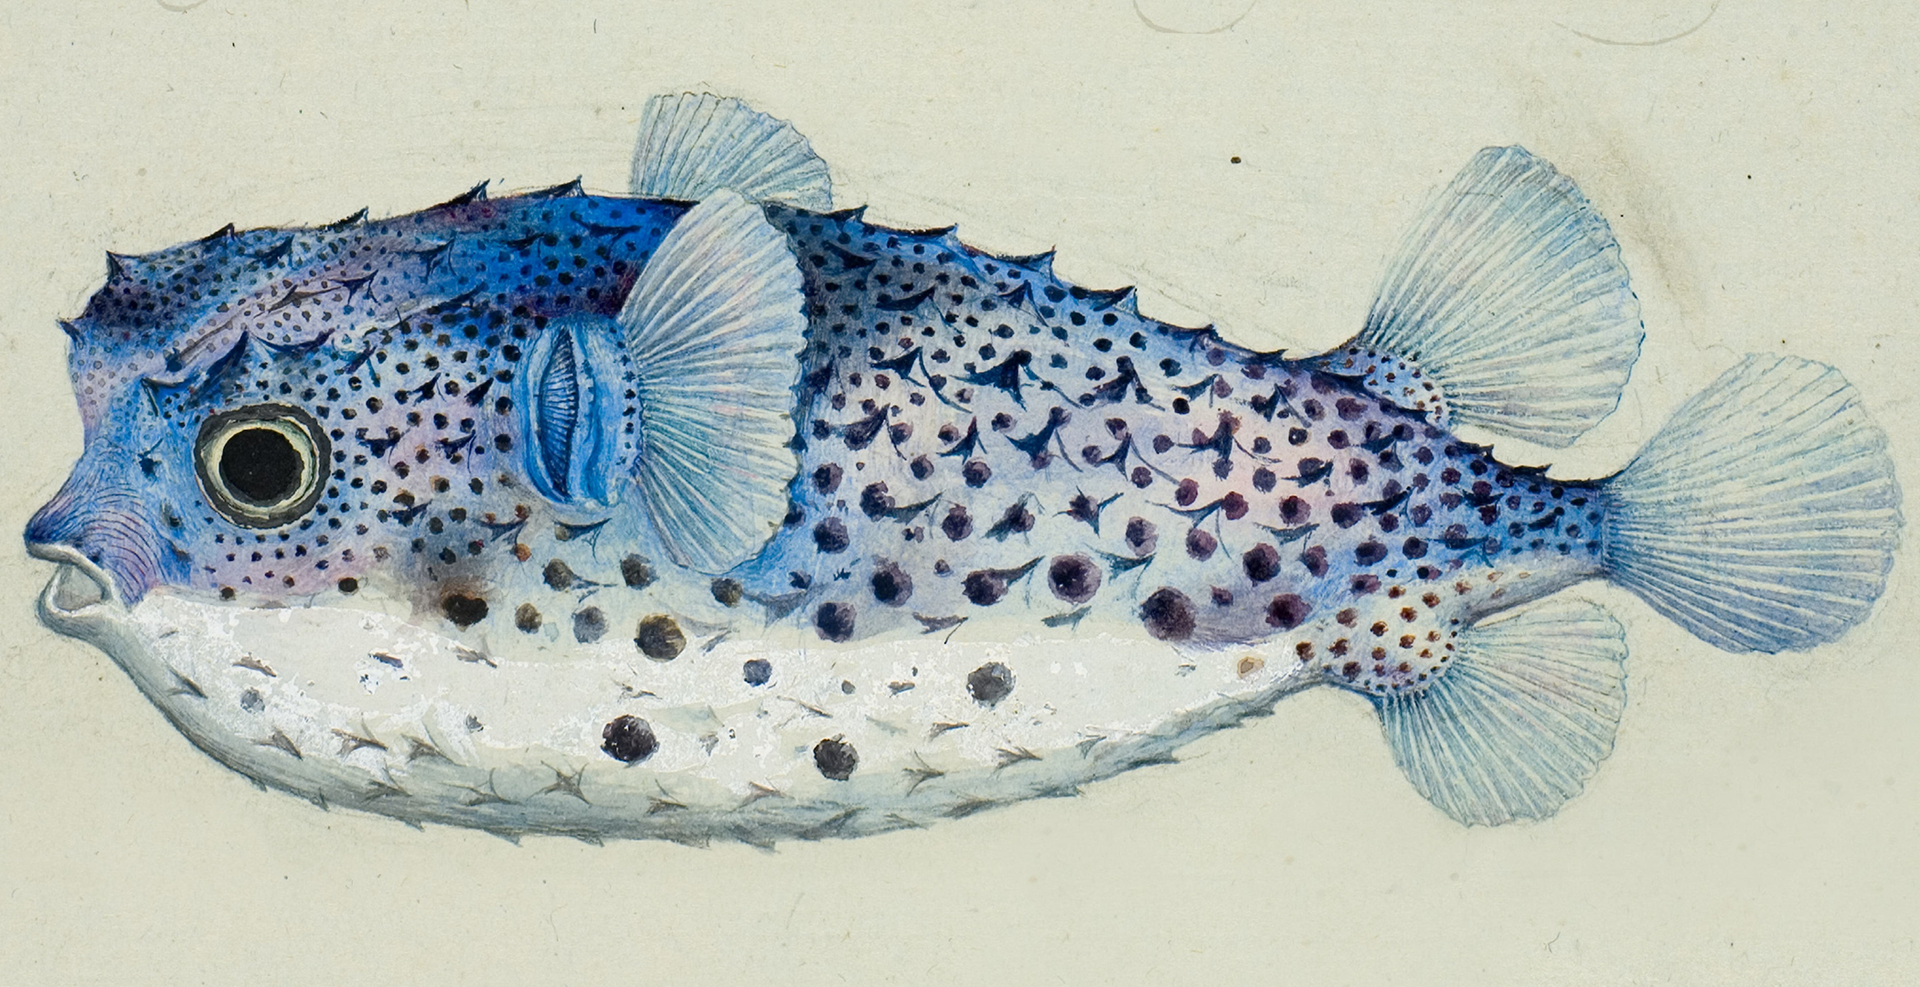 See exquisite illustrations by French artists made during Nicolas Baudin’s exploration of Australia.